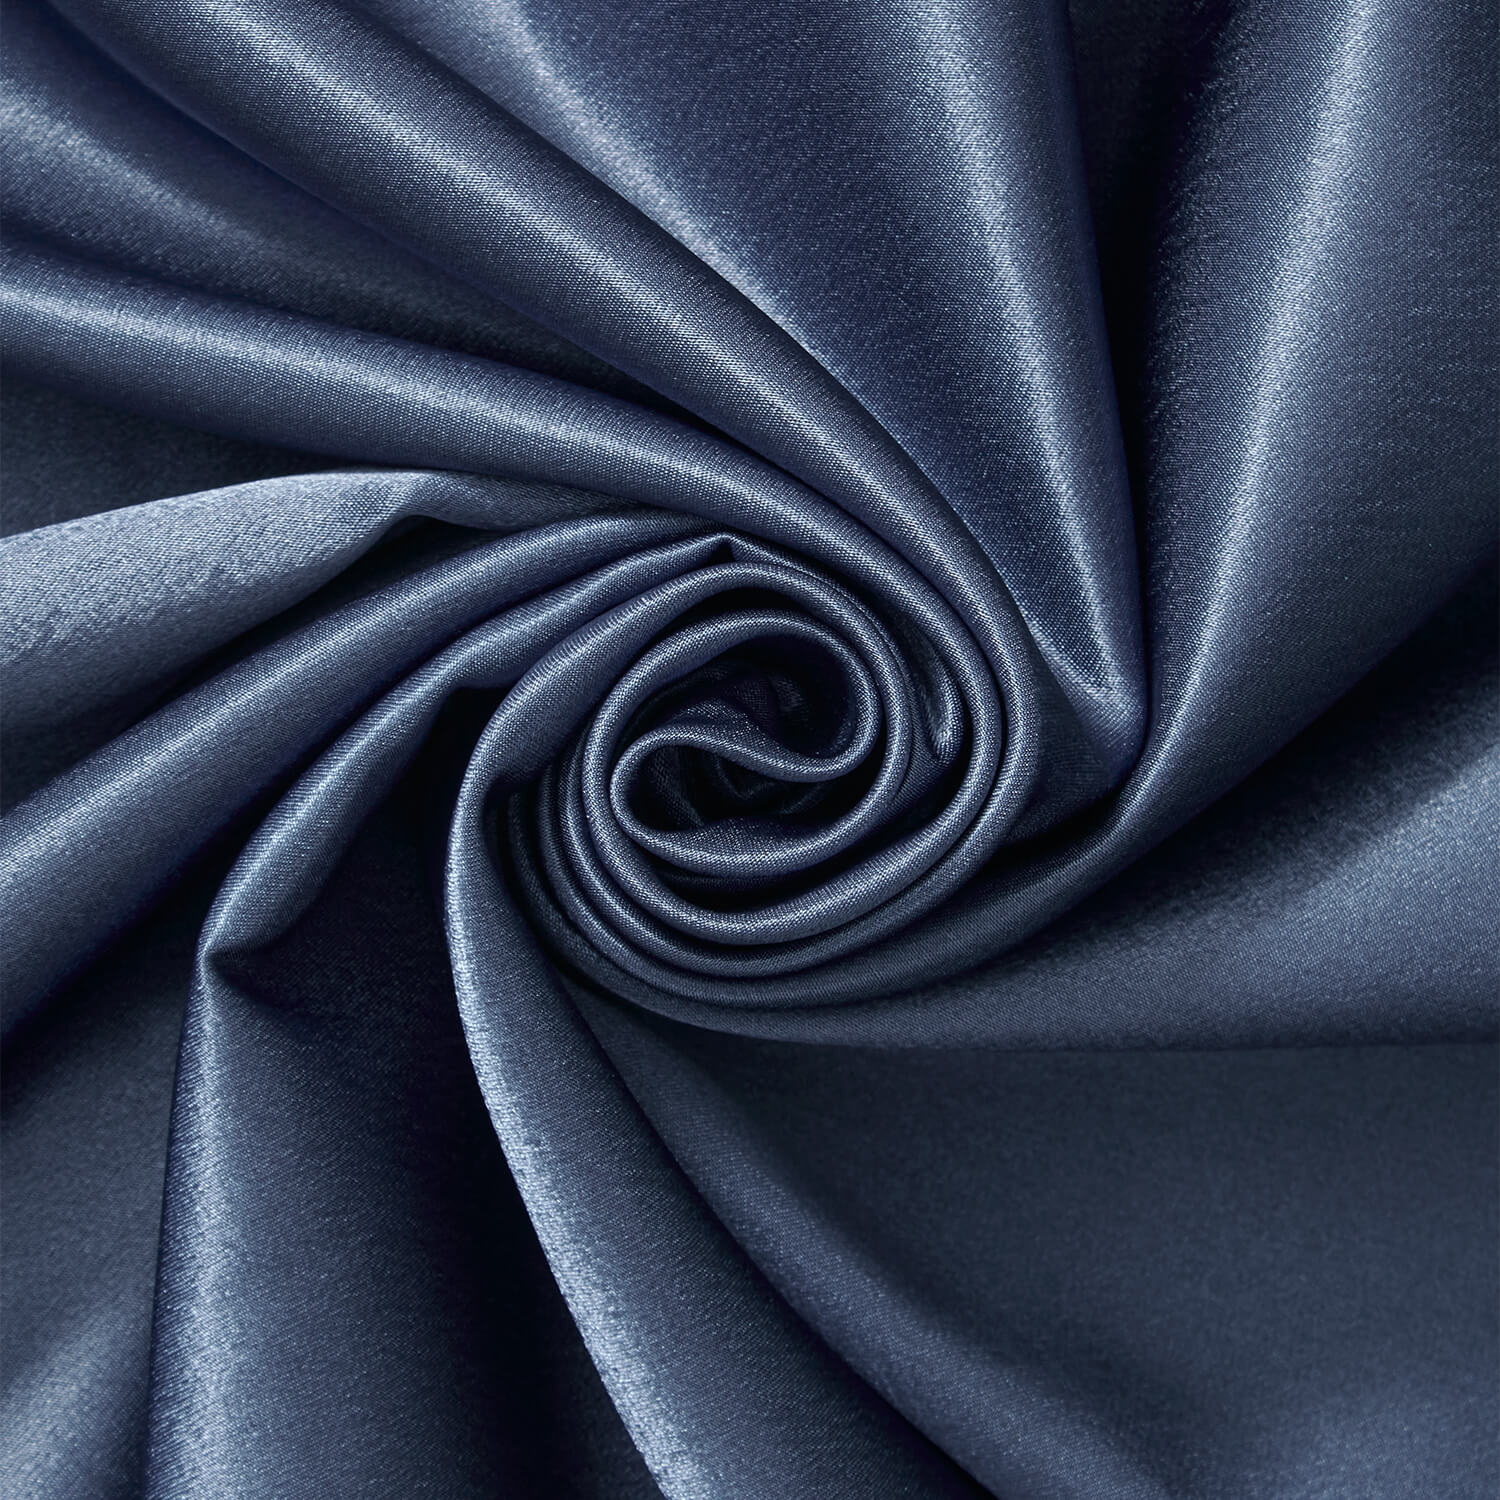 Crepe Back Satin Bridal Fabric Drapery Soft 60 inch Inches by The Yard (Midnight Blue)